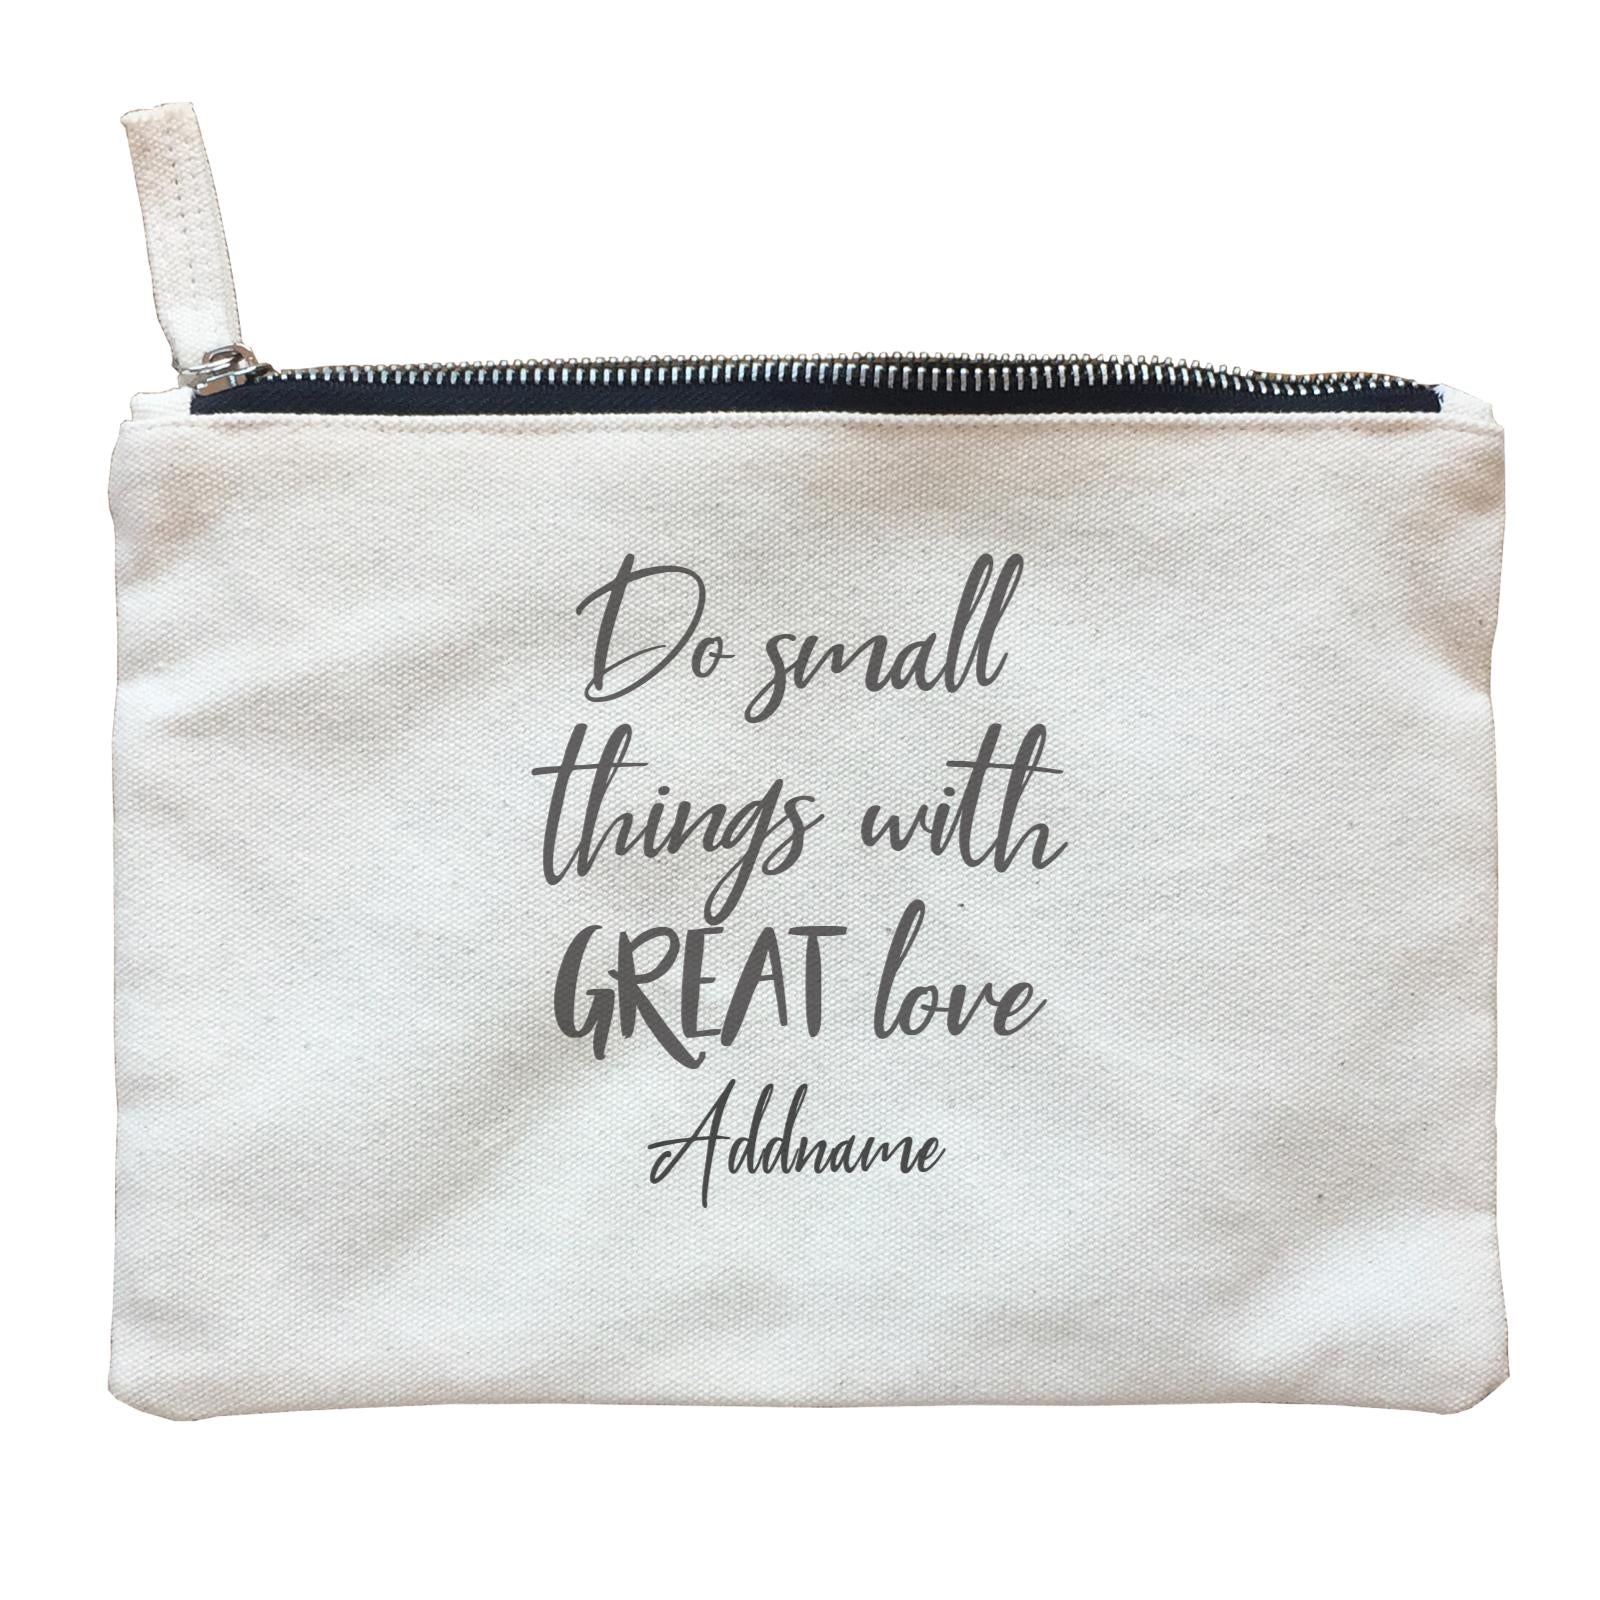 Inspiration Quotes Do Small Things With Great Love Addname Zipper Pouch